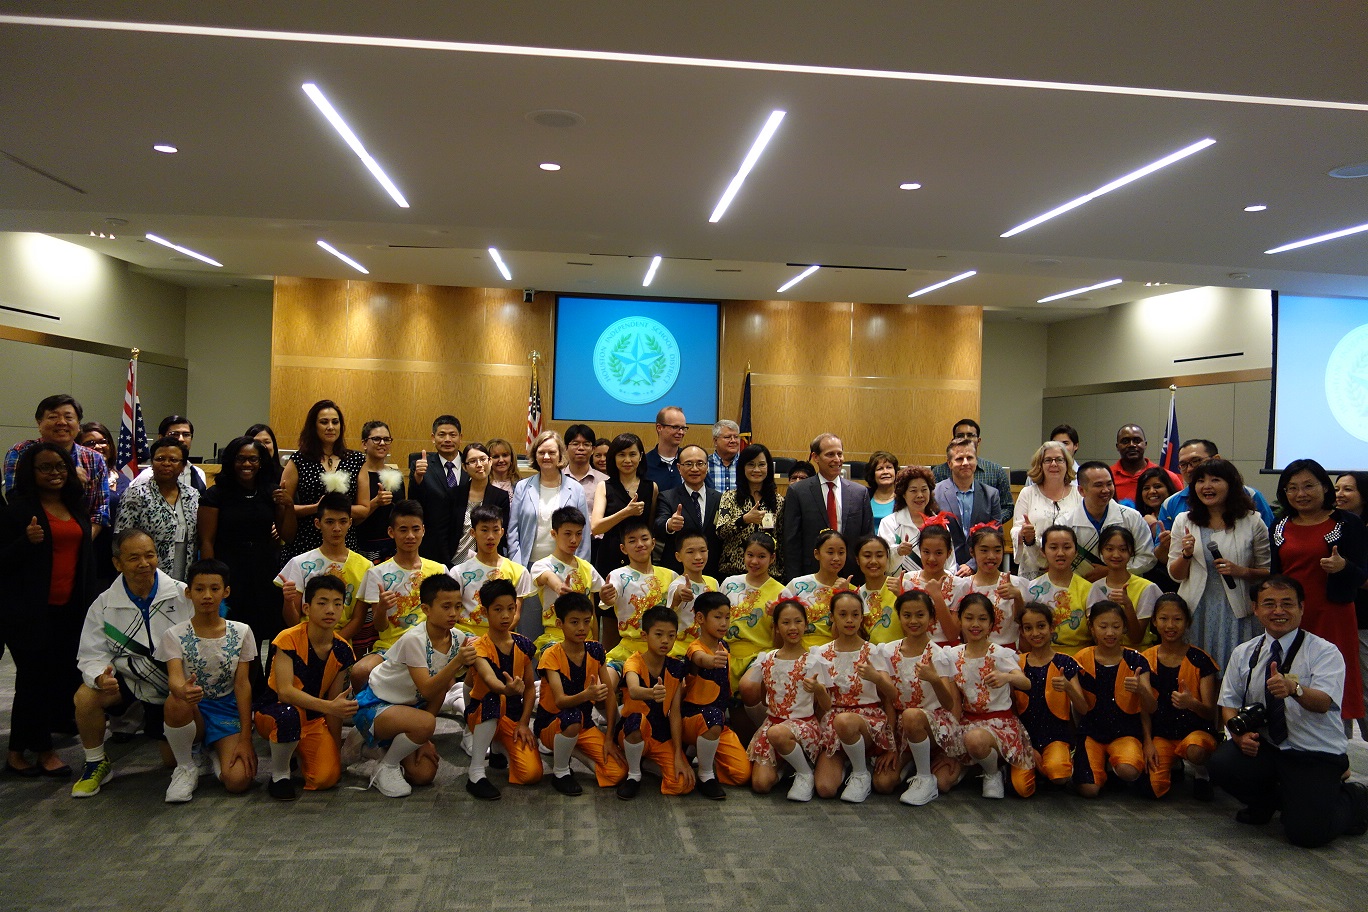 Houston Independent School District Warmly Applauds the Taipei Youth Folk Sports Group